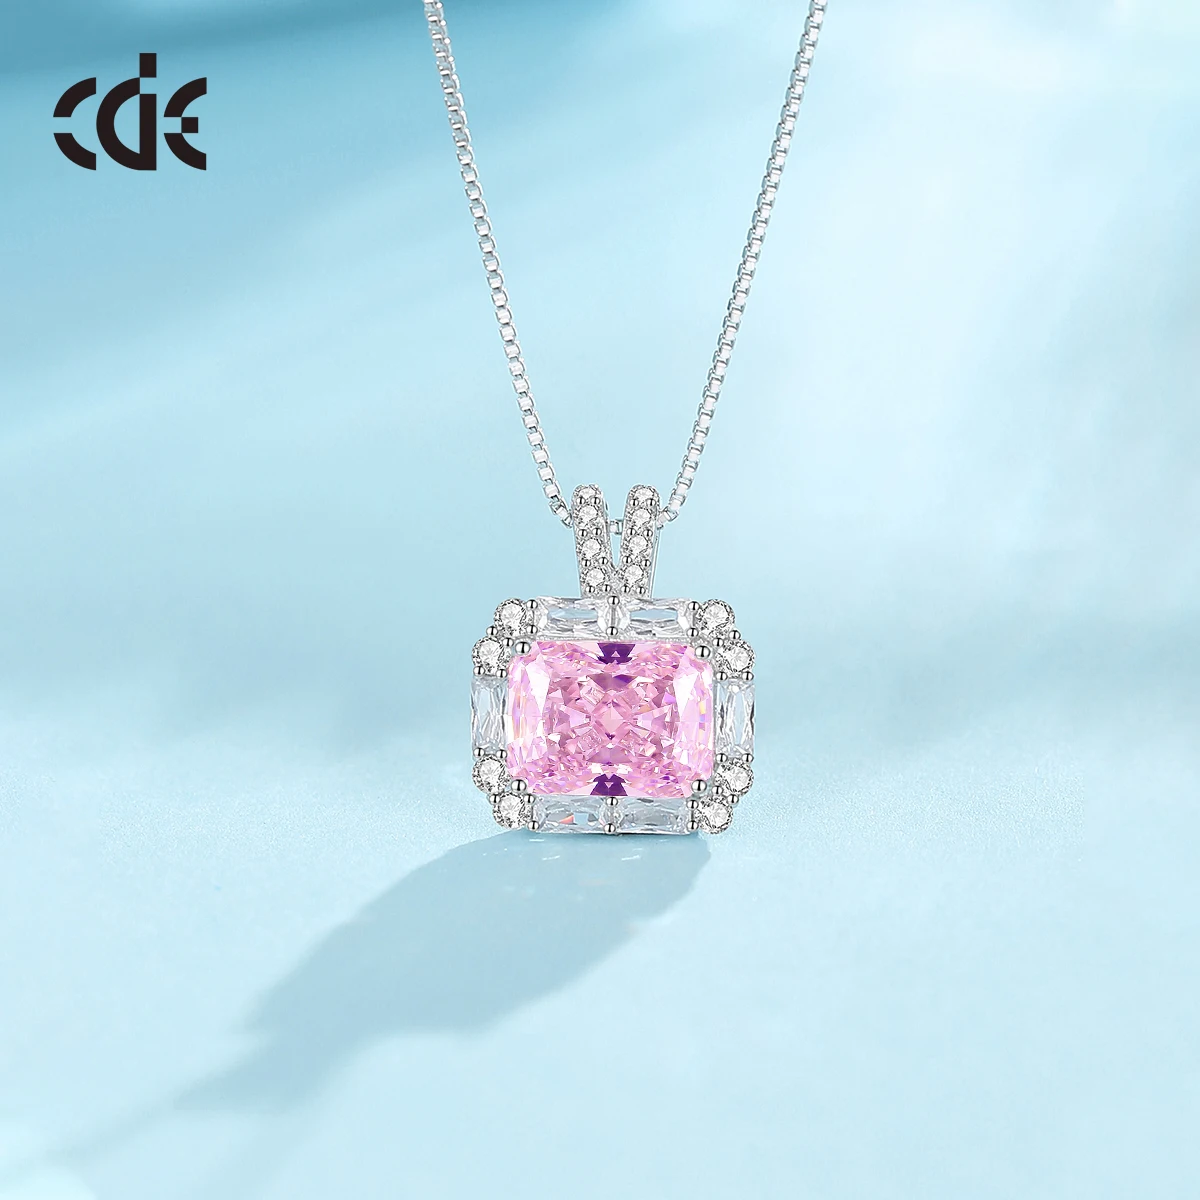 CDE WYN5 Fine Jewelry 925 Sterling Silver Necklace Wholesale Pink Cubic Zirconia Pendant Rhodium Plated Chain Pendant Necklace